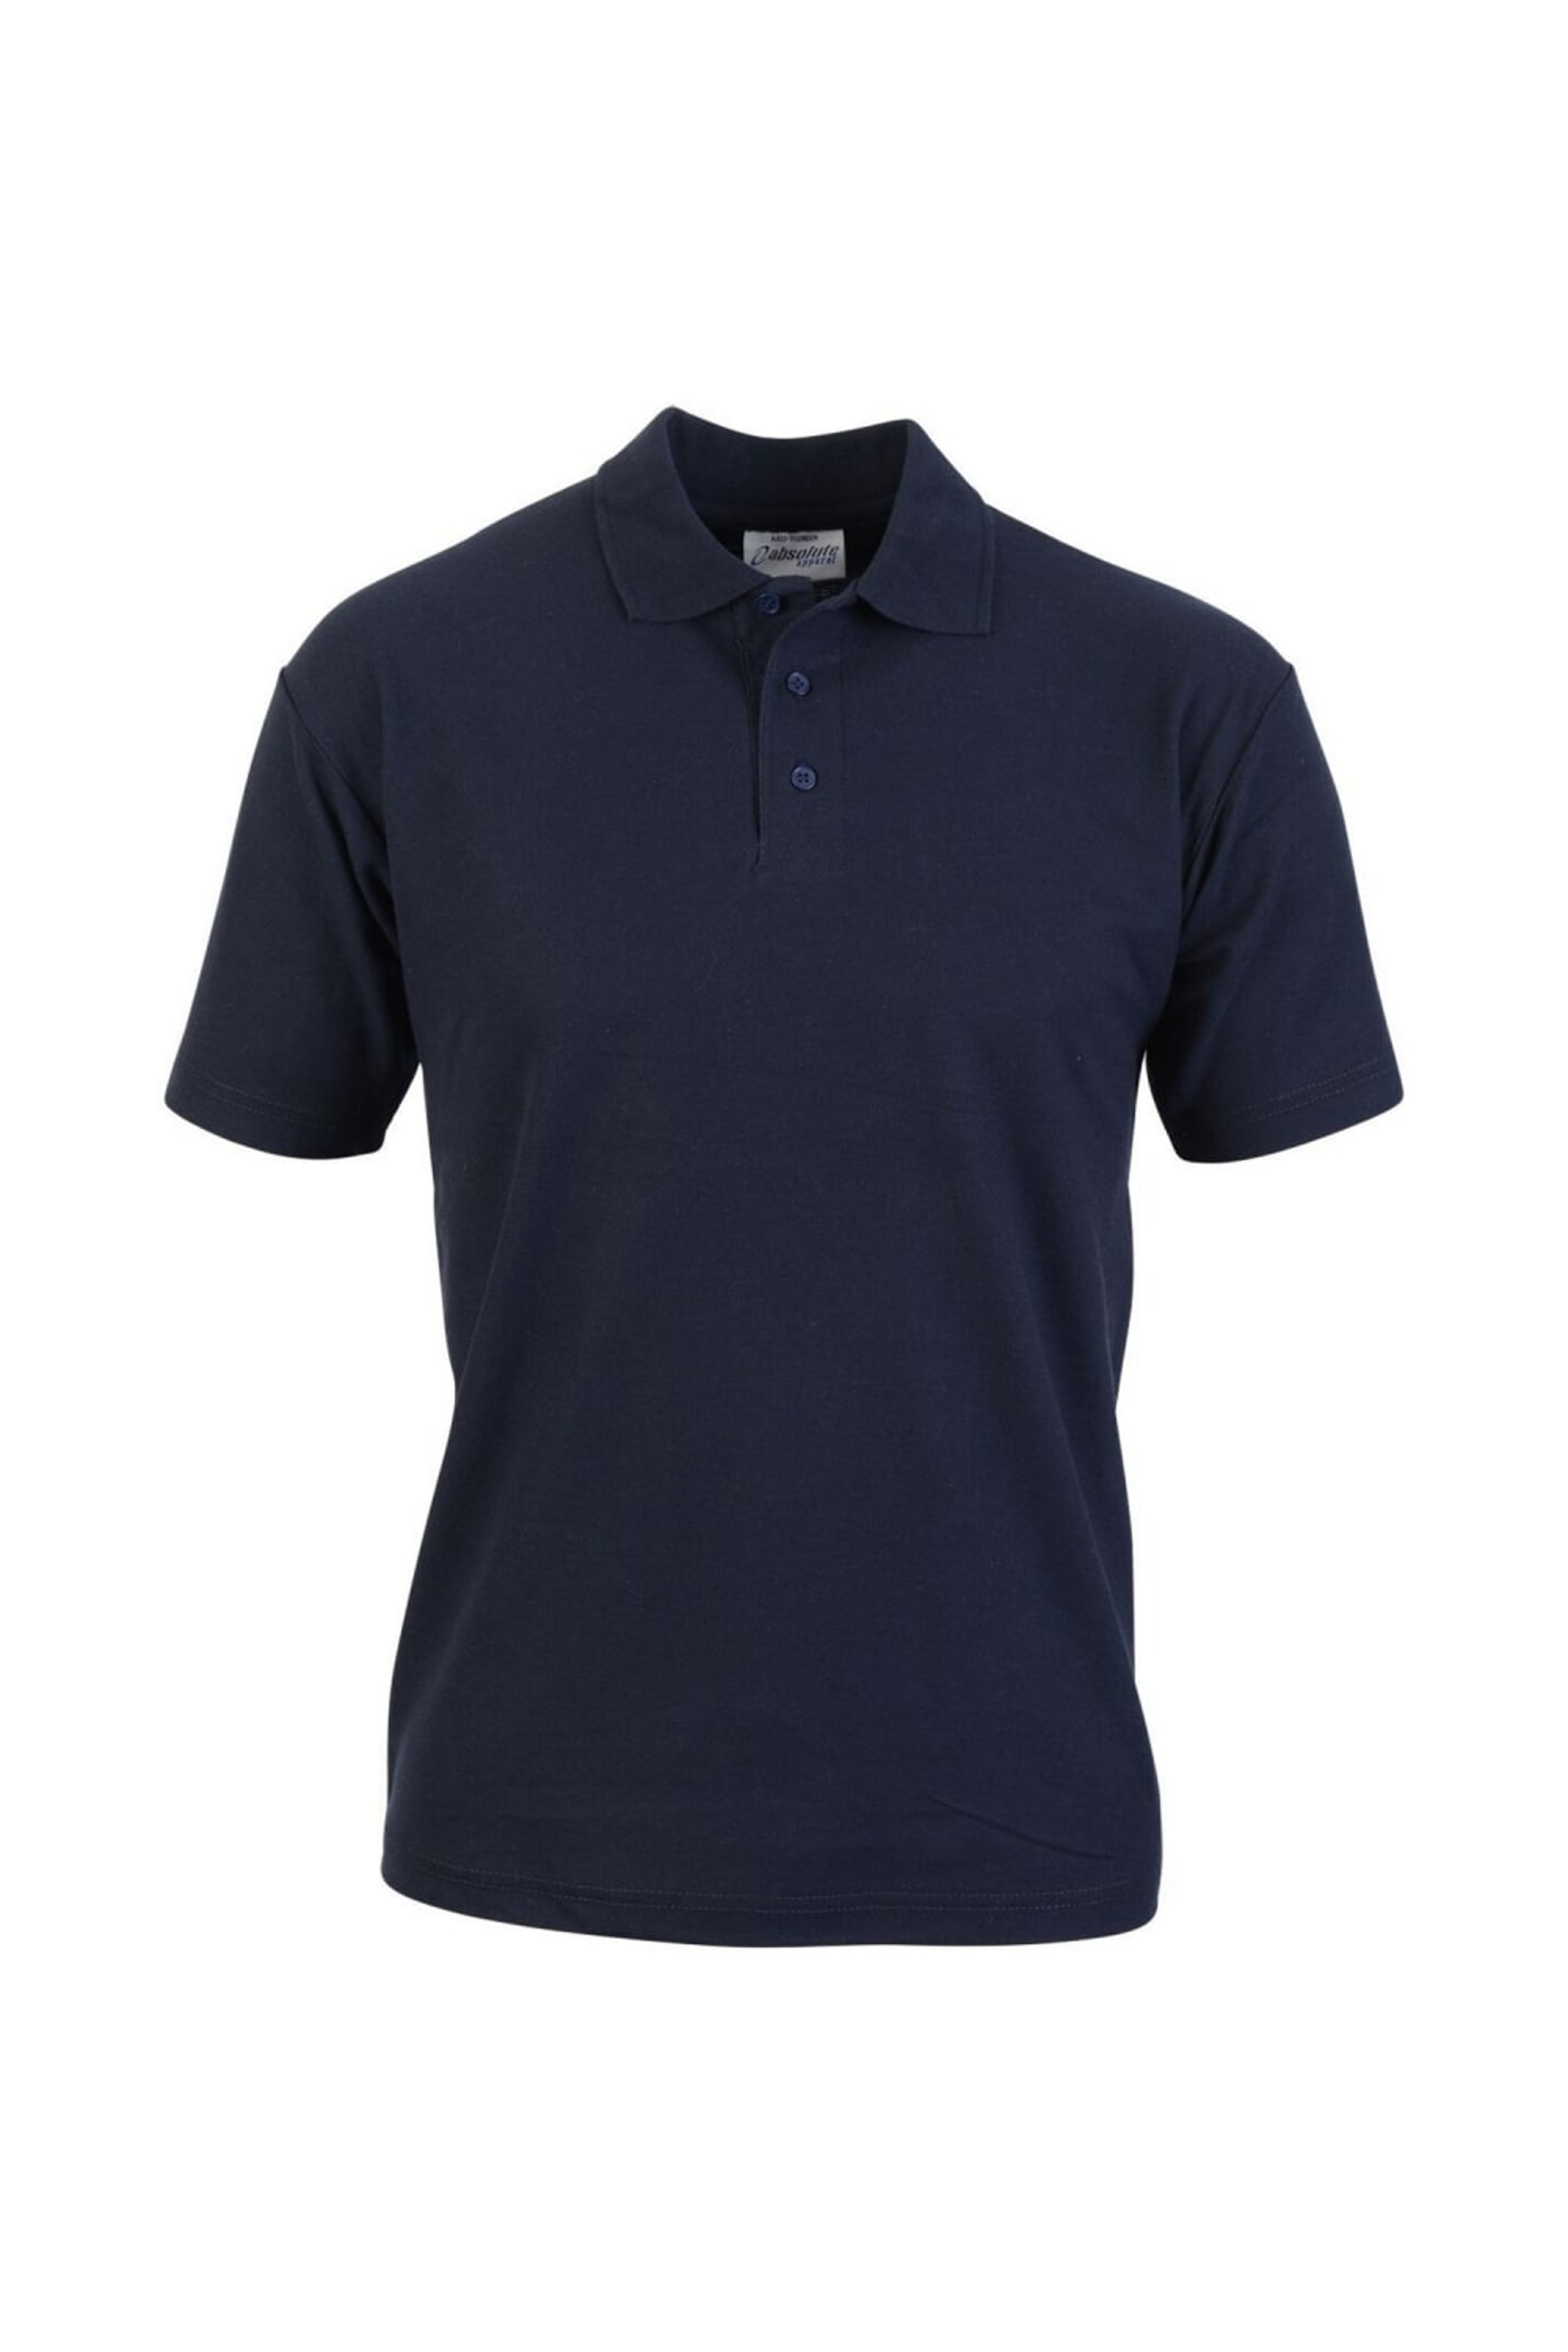 ABSOLUTE APPAREL ABSOLUTE APPAREL MENS PIONEER POLO T-SHIRT